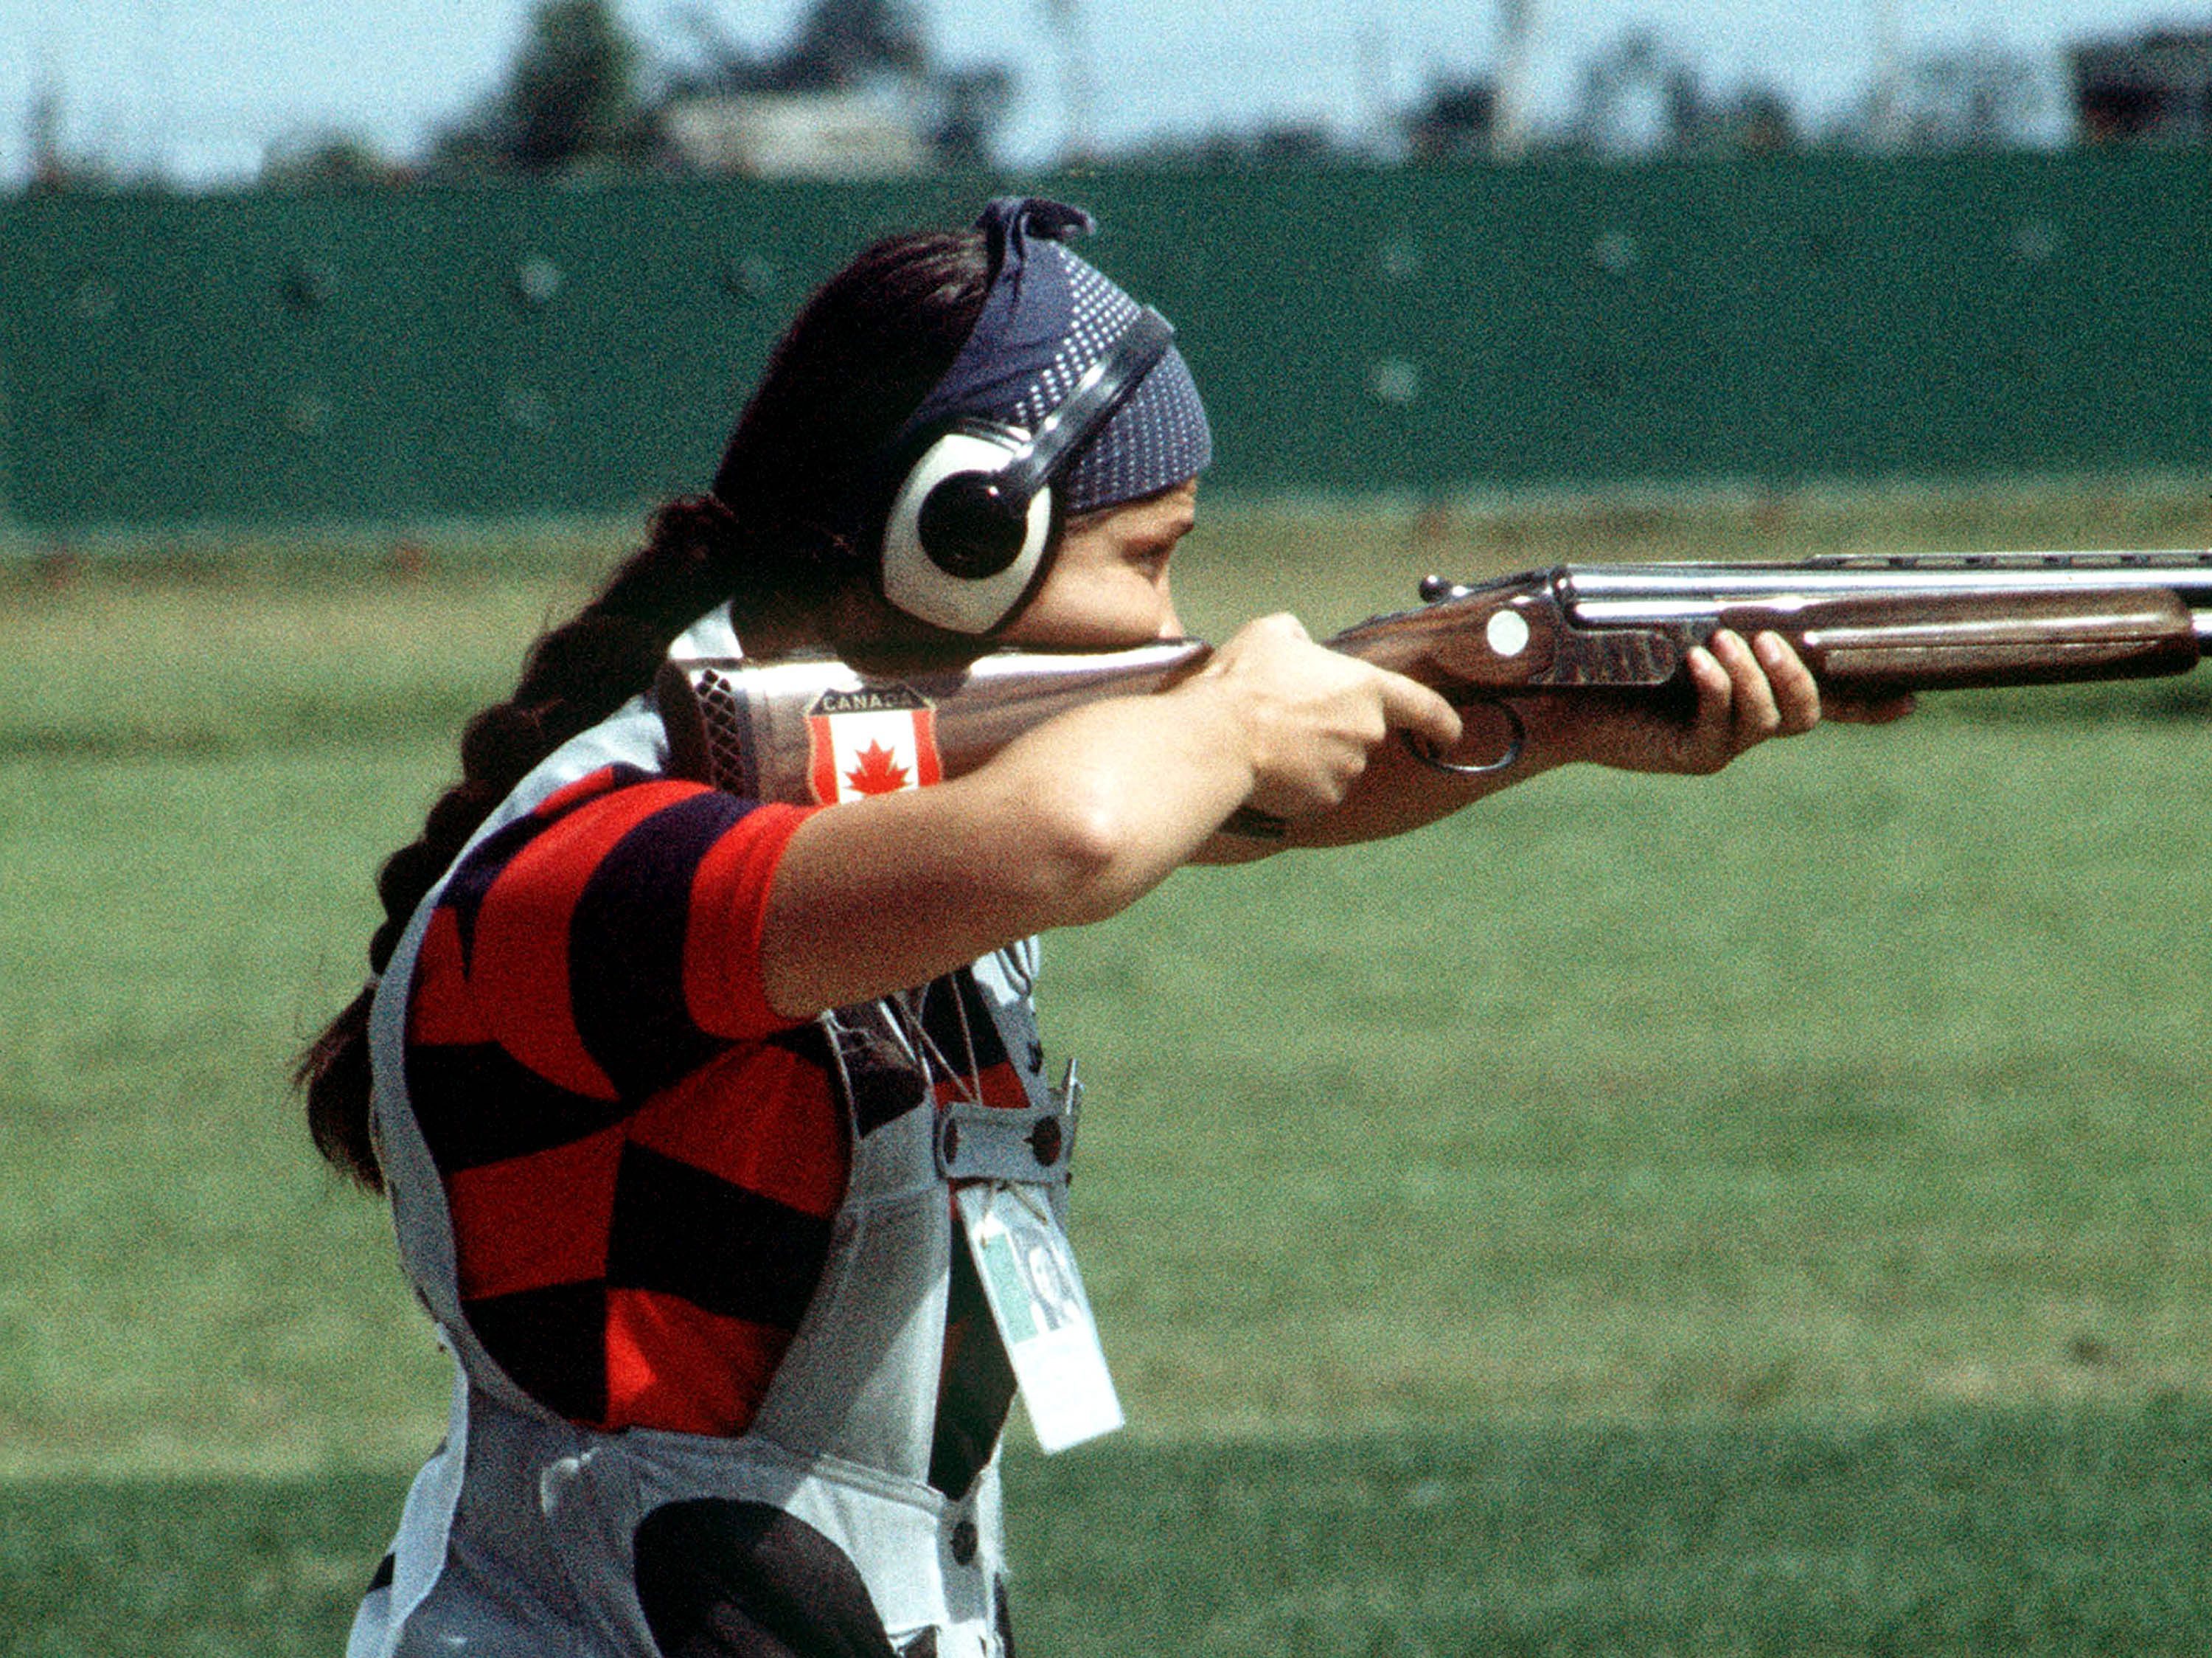 Susan Nattrass competes in the trap shooting event at the Montreal 1976 Olympic Games.